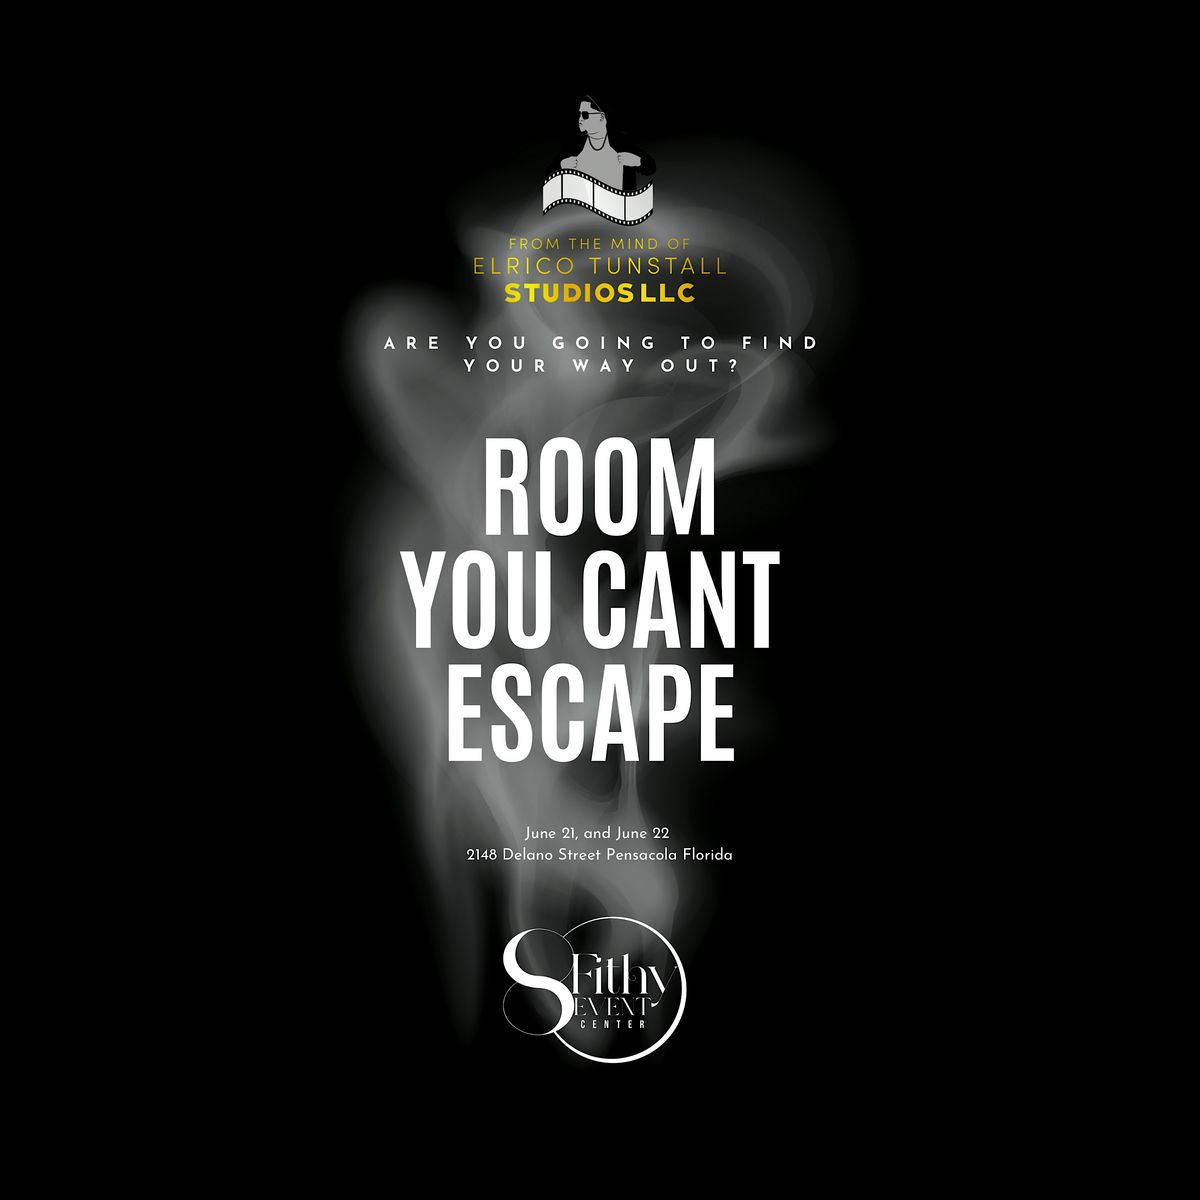 Rooms you can't escape